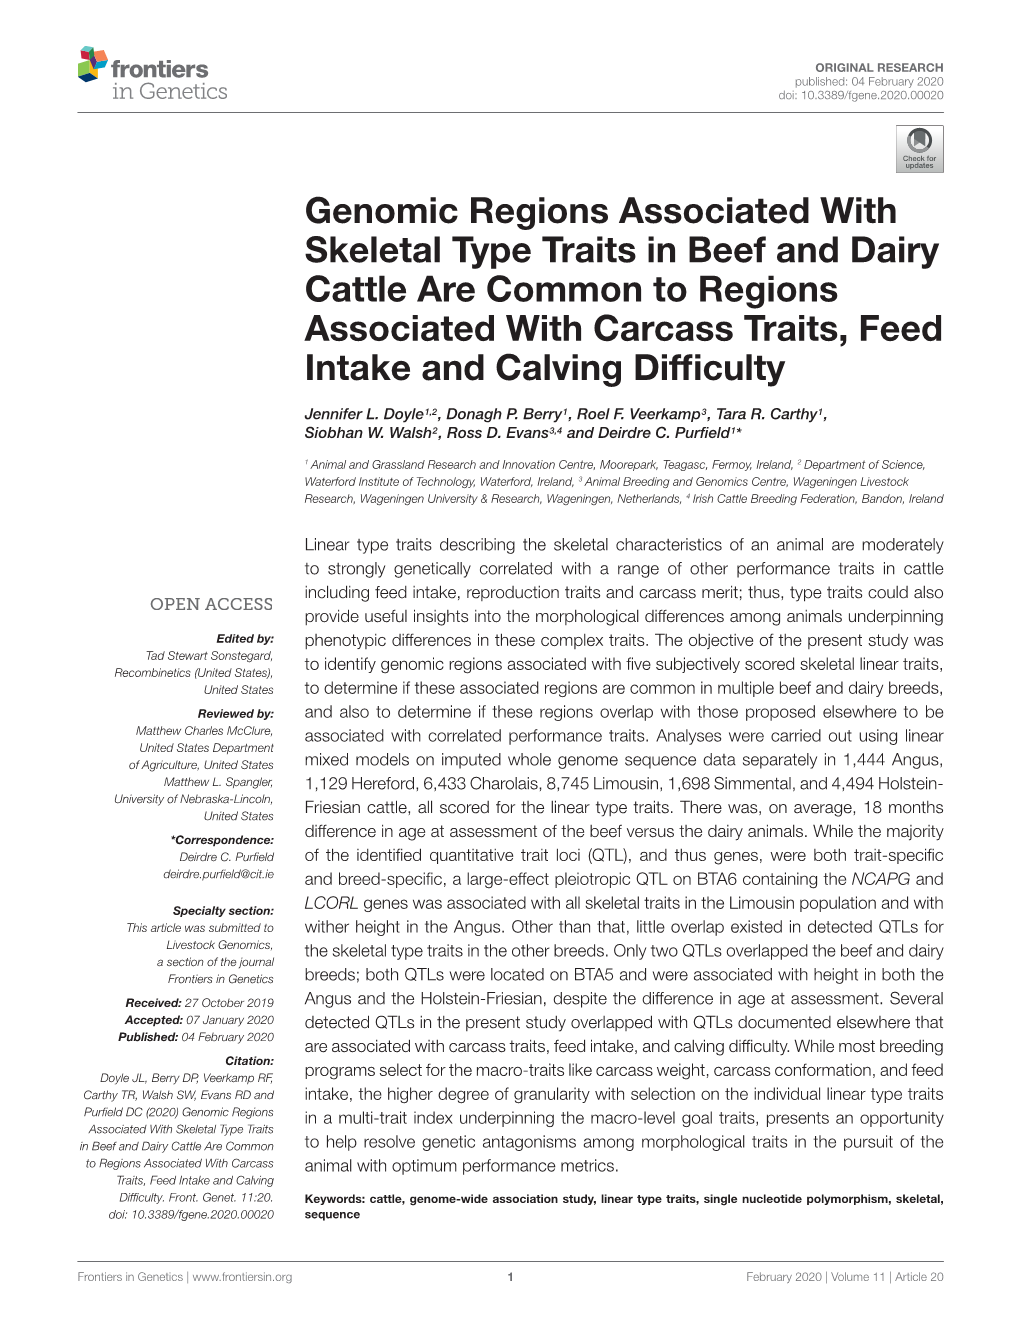 Genomic Regions Associated with Skeletal Type Traits in Beef and Dairy Cattle Are Common to Regions Associated with Carcass Traits, Feed Intake and Calving Difﬁculty